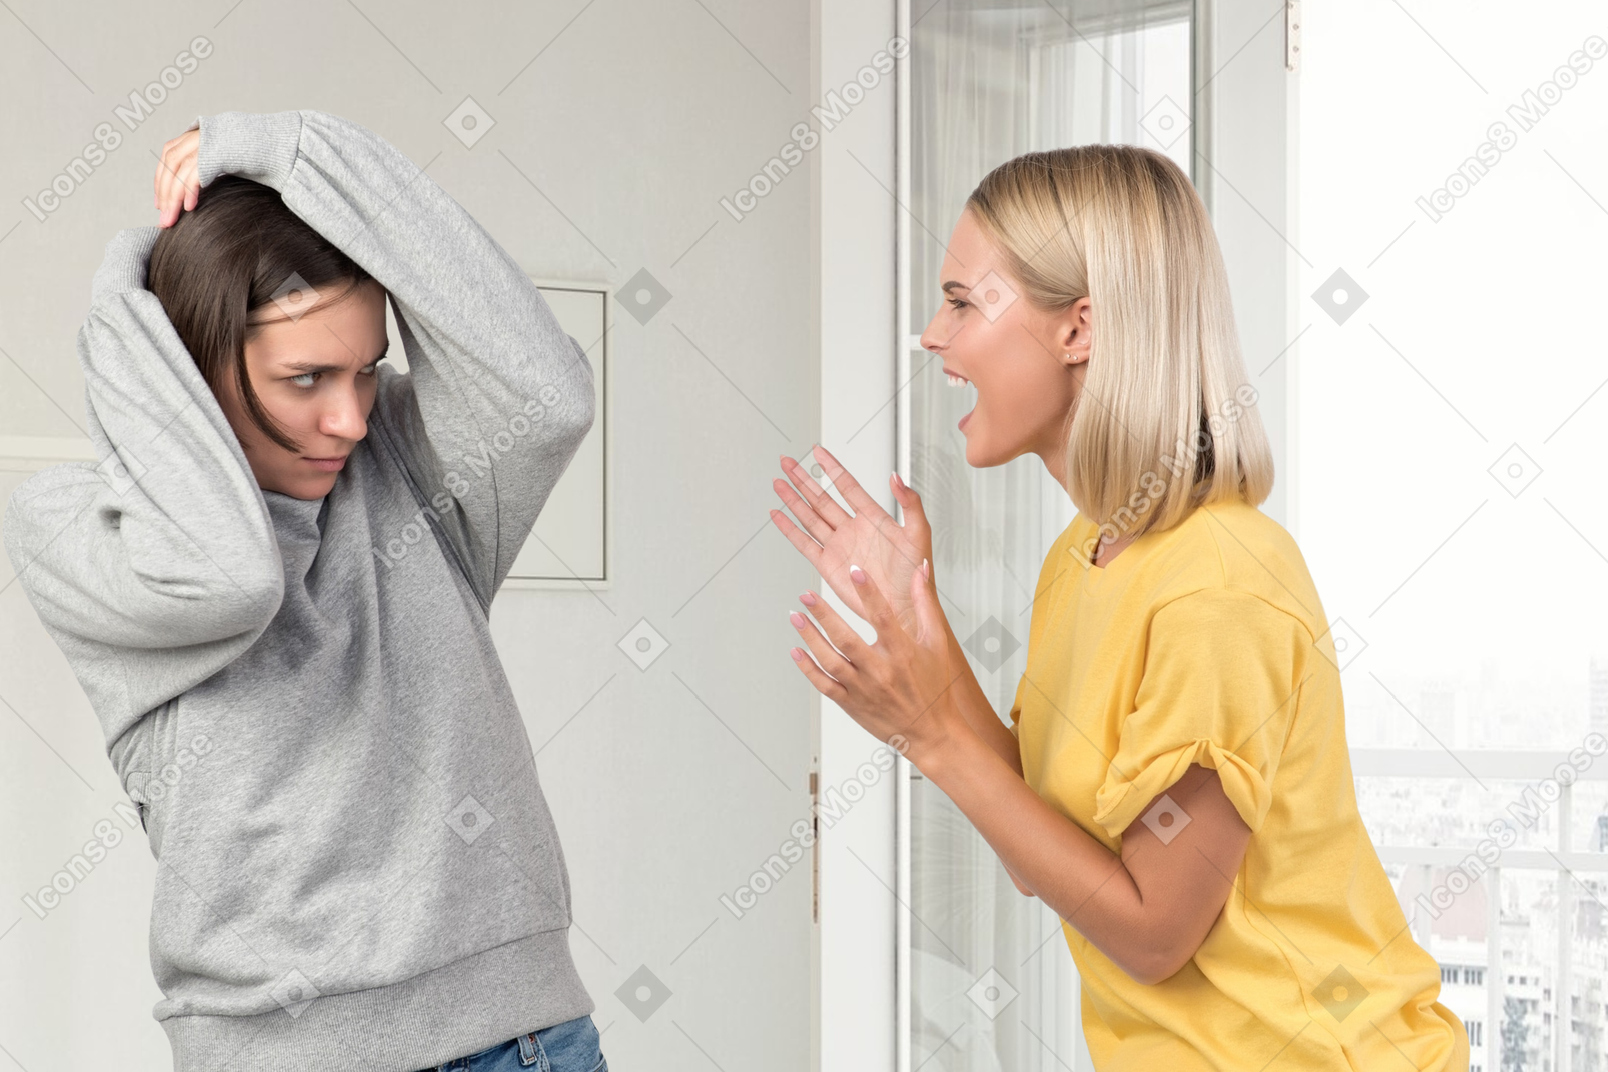 A woman shouting on another woman